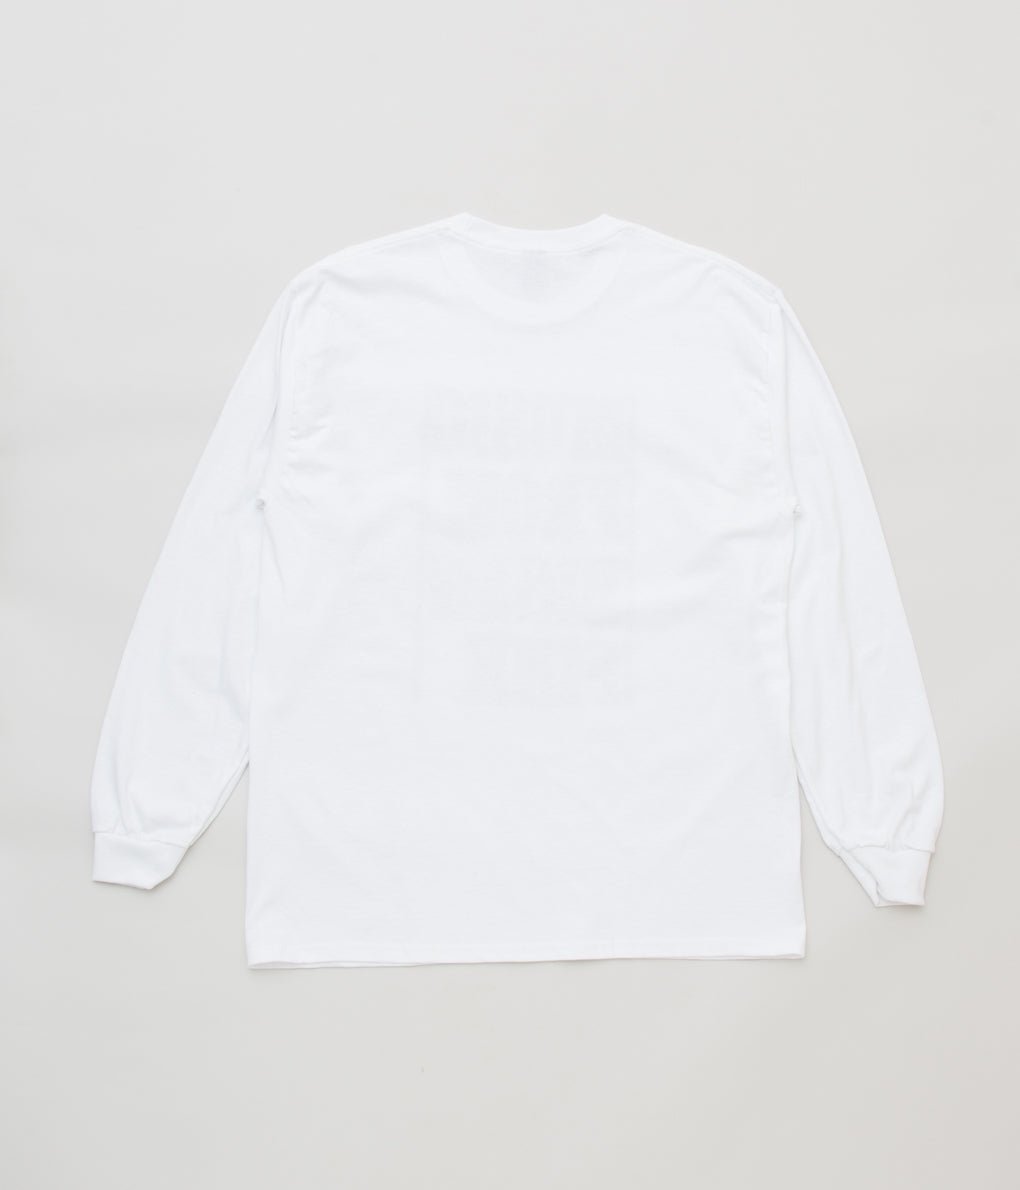 BLUESCENTRIC "MUSIC FROM BIG PINK L/S TEE"(WHITE)